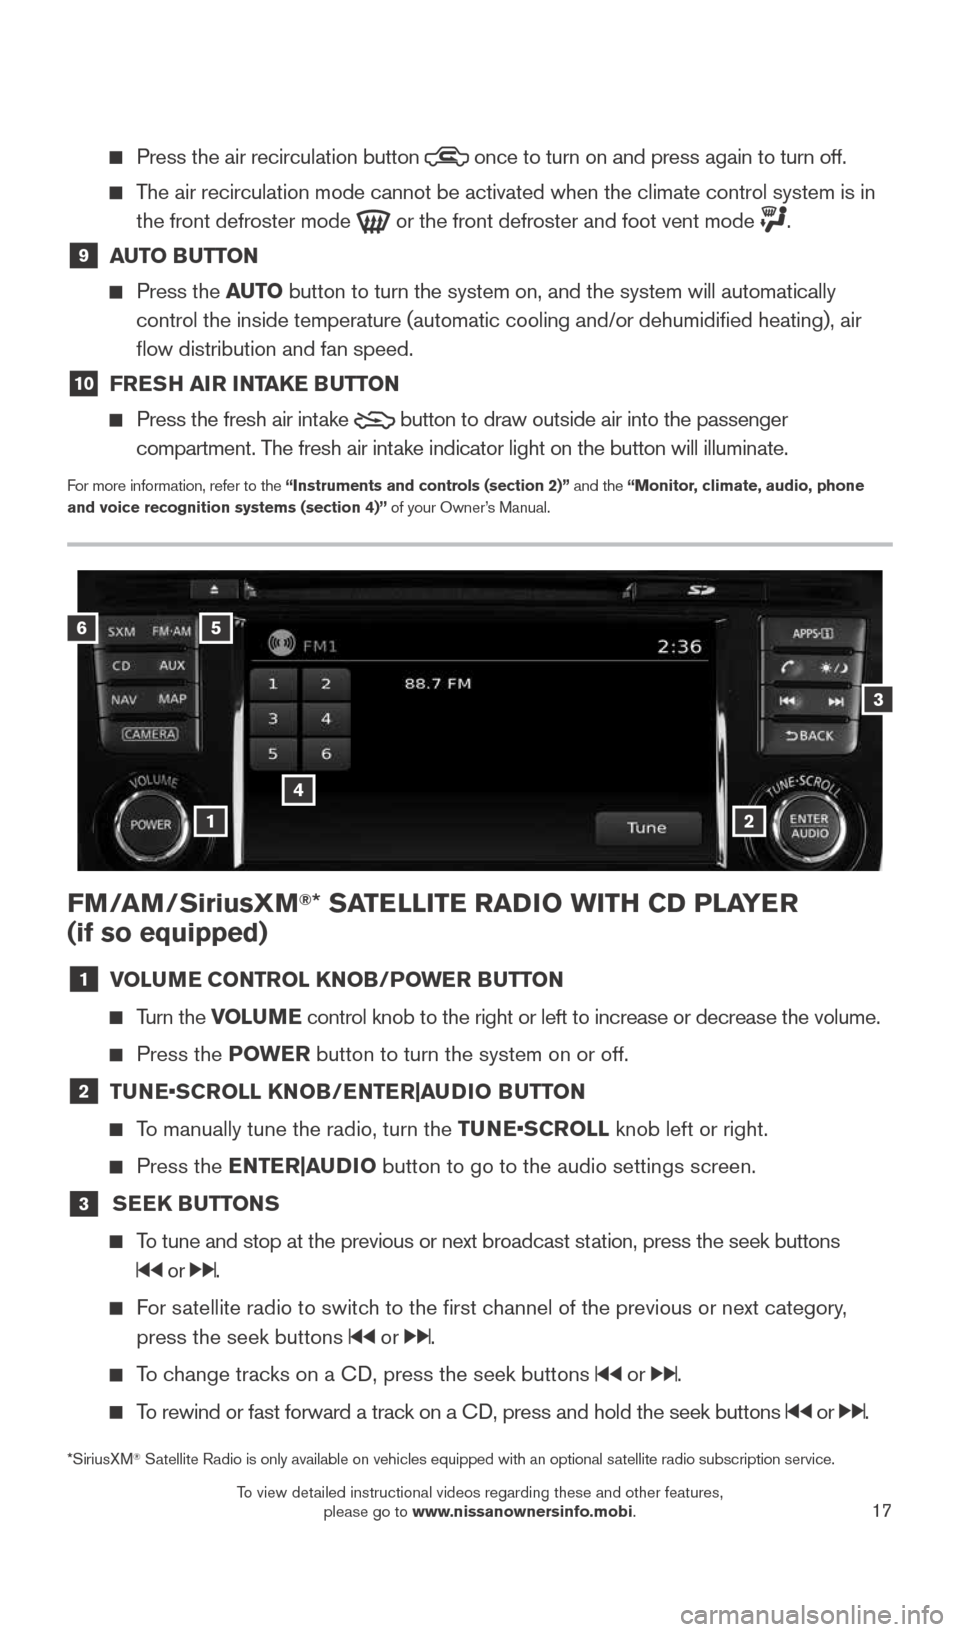 NISSAN ROGUE 2015 2.G Quick Reference Guide 17
FM/AM/SiriusXM®* SATELLITE RADIO WITH CD PLAYER  
(if so equipped)
1  VOLUME CONTROL KNOB/POWER BUTTON
  
  Turn the VOLUME control knob to the right or left to increase or decrease the volume.
  